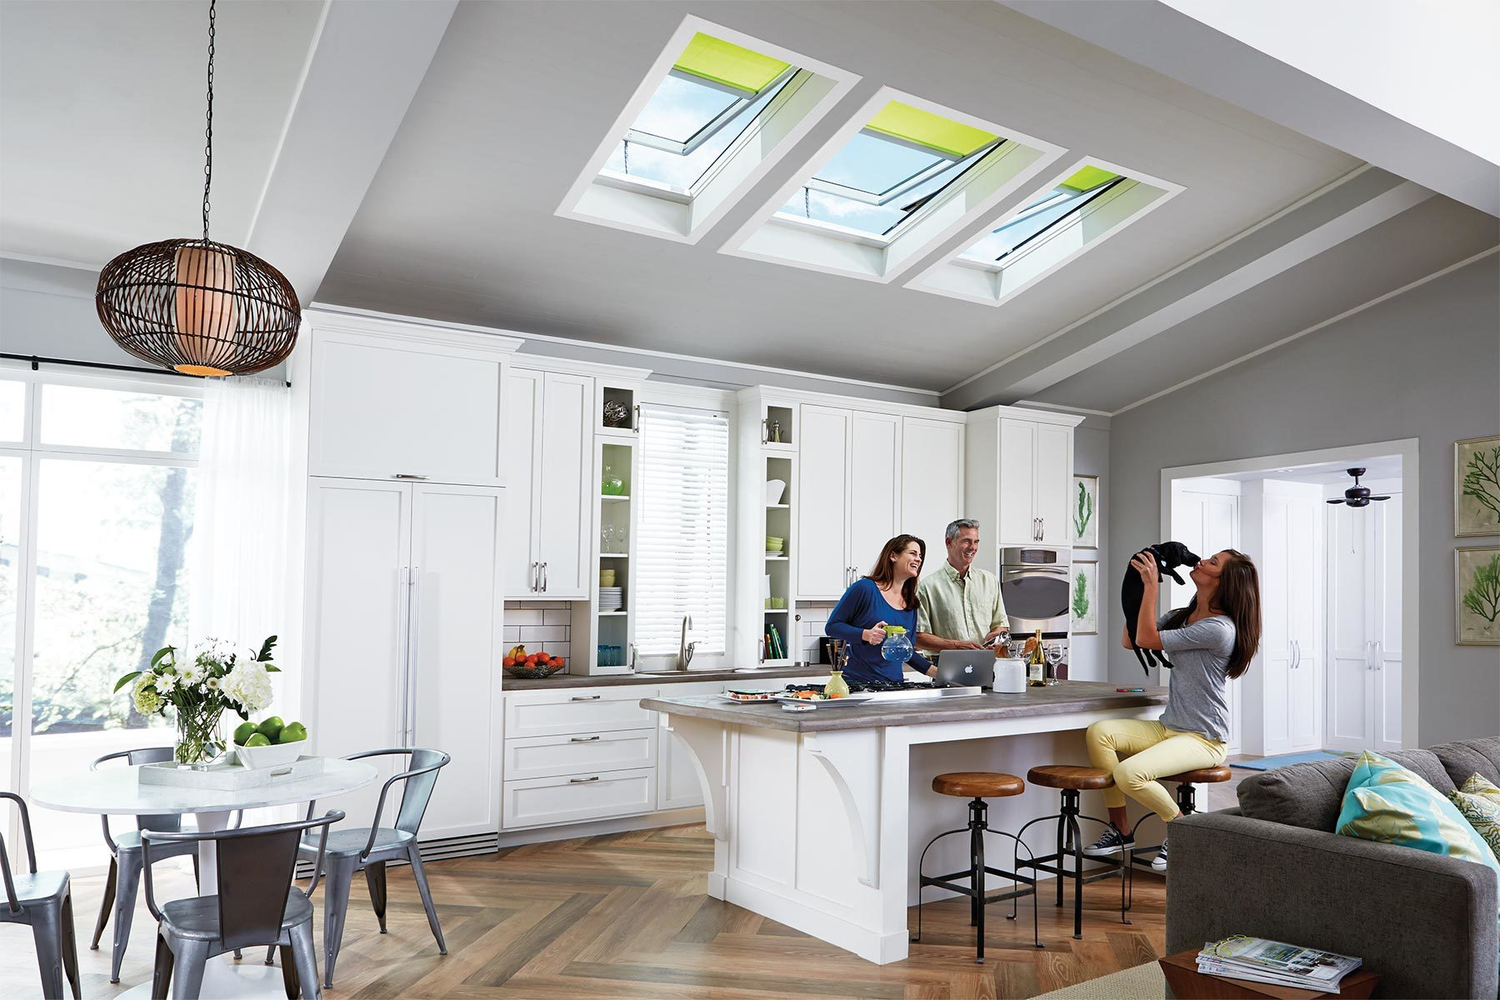 Velux solar powered venting skylights with blinds in kitchen, living room and bathroom in Dublin - Upper Arlington - Lewis Center - Powell - Delaware - Sunbury - Worthington - Westerville - Clintonville - Gahanna - Columbus Ohio